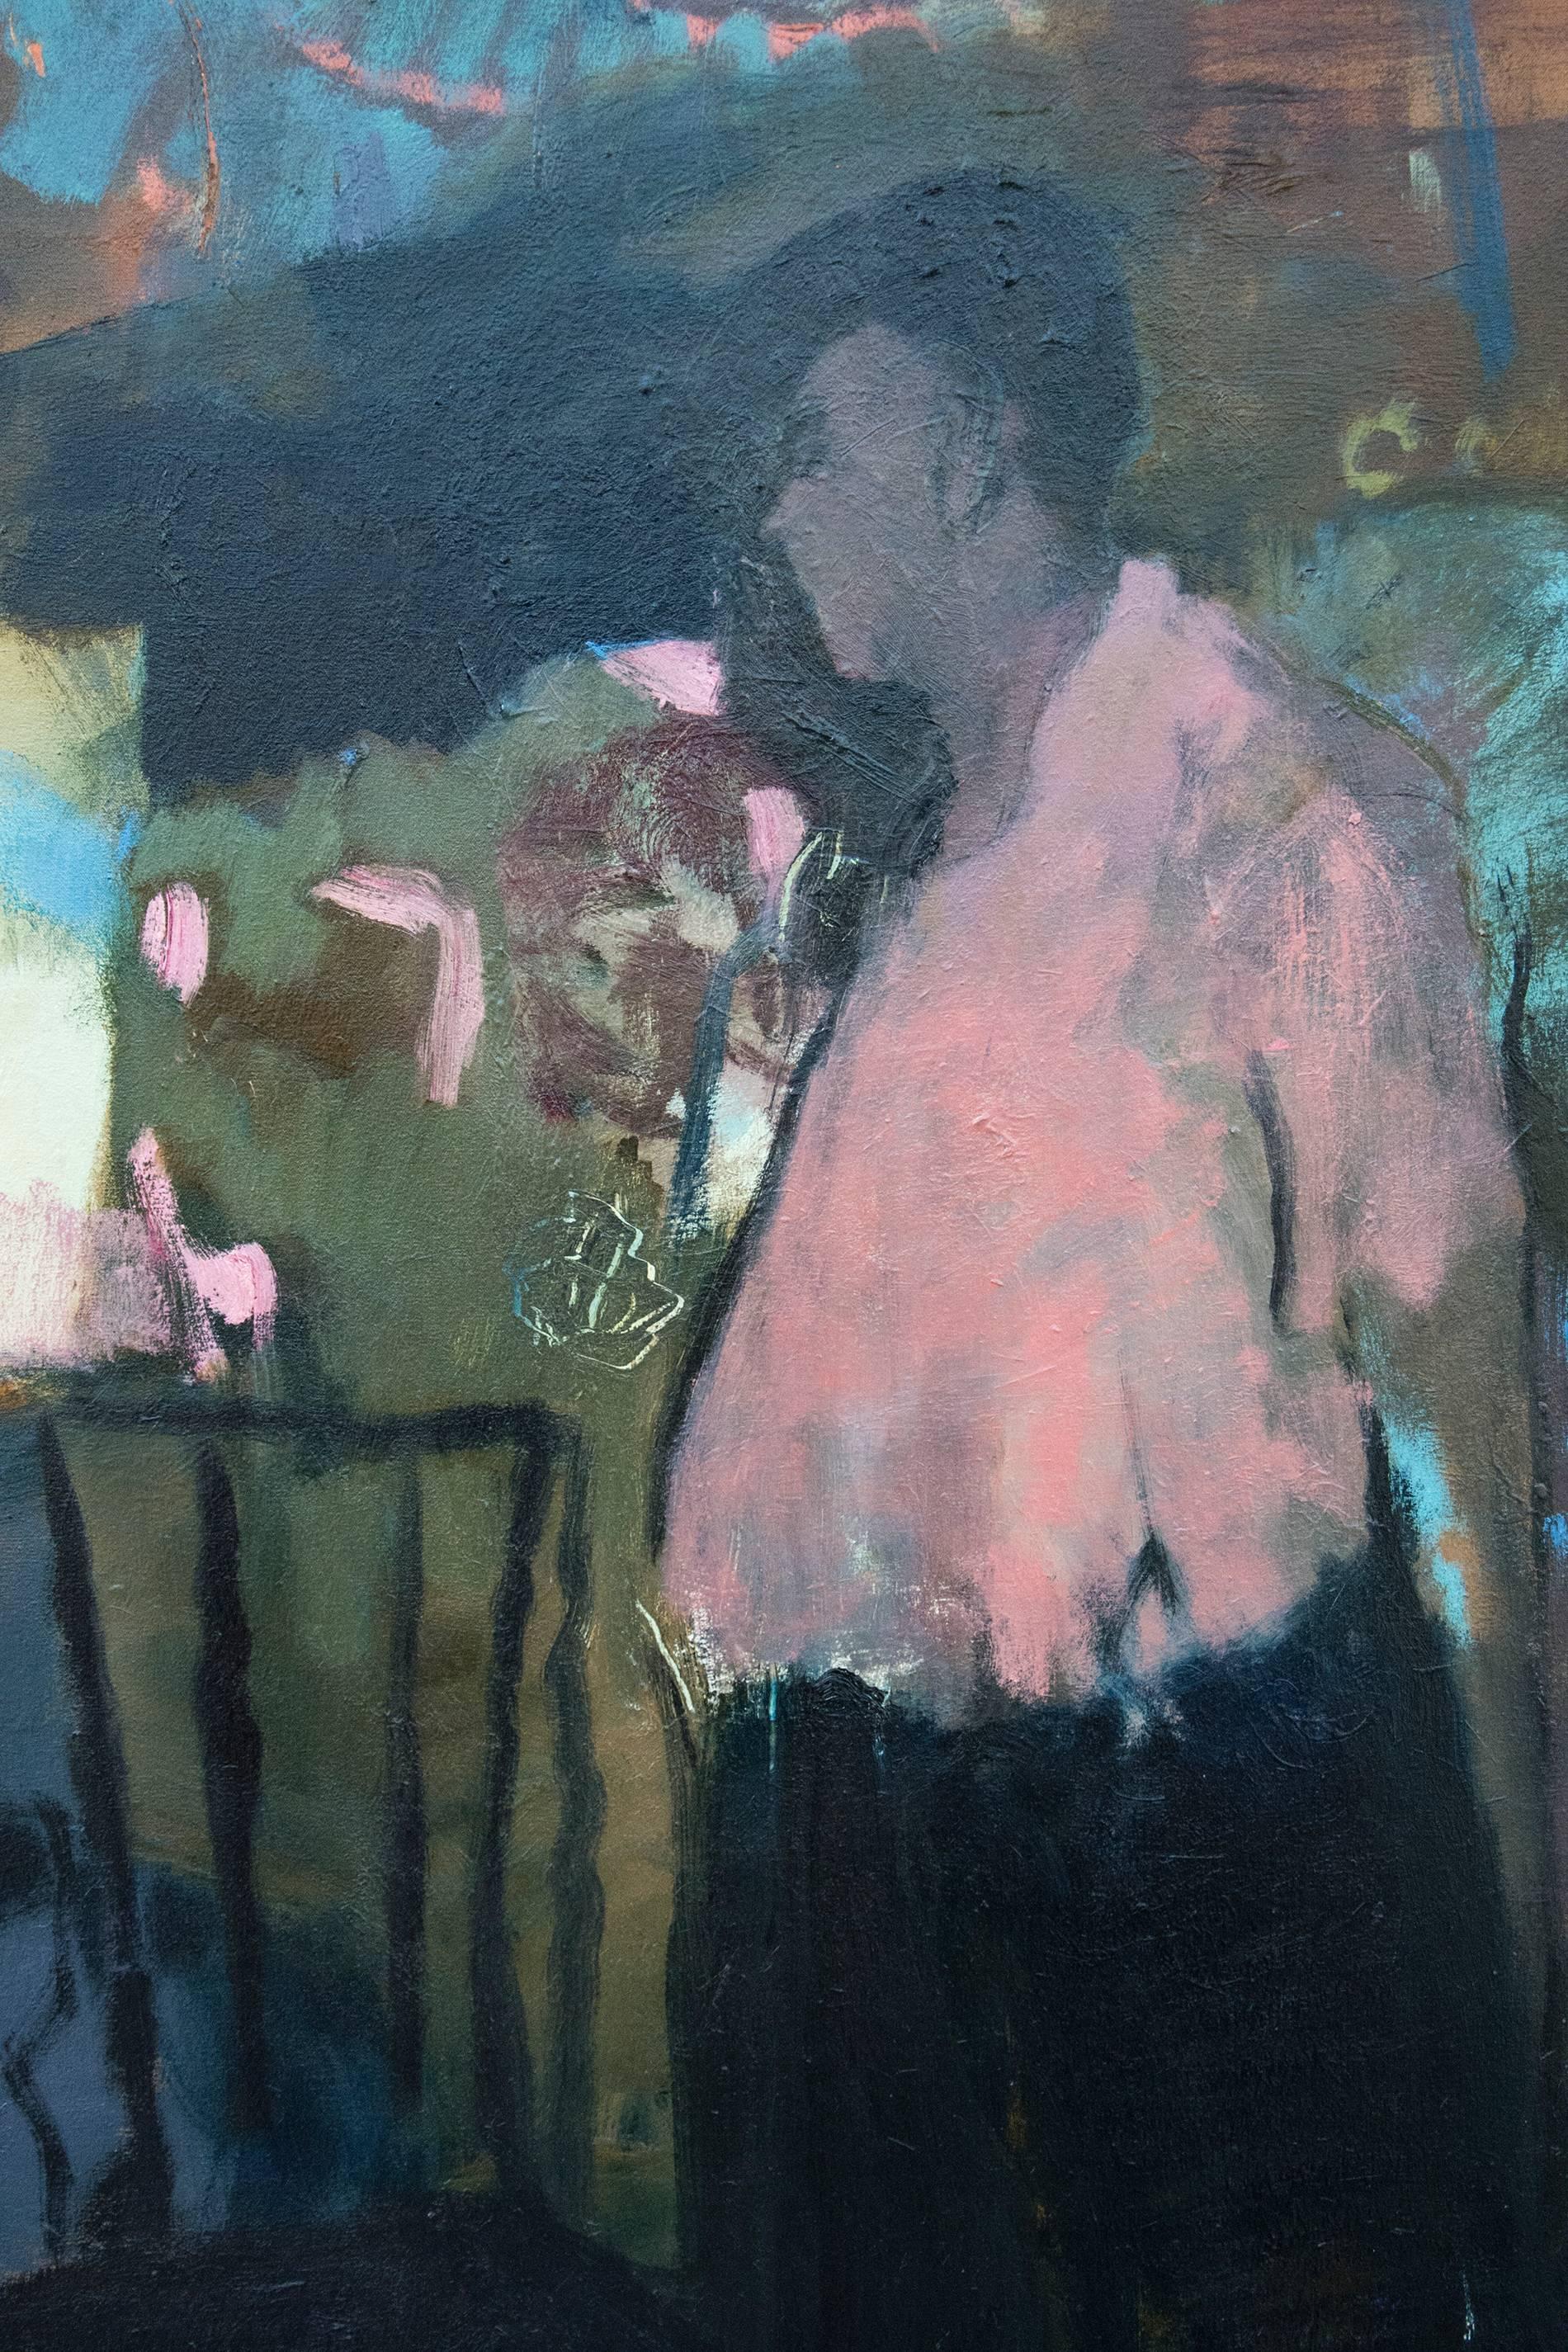 Man With Pink Shirt - large abstracted male portrait figurative still life oil - Contemporary Painting by Jennifer Hornyak